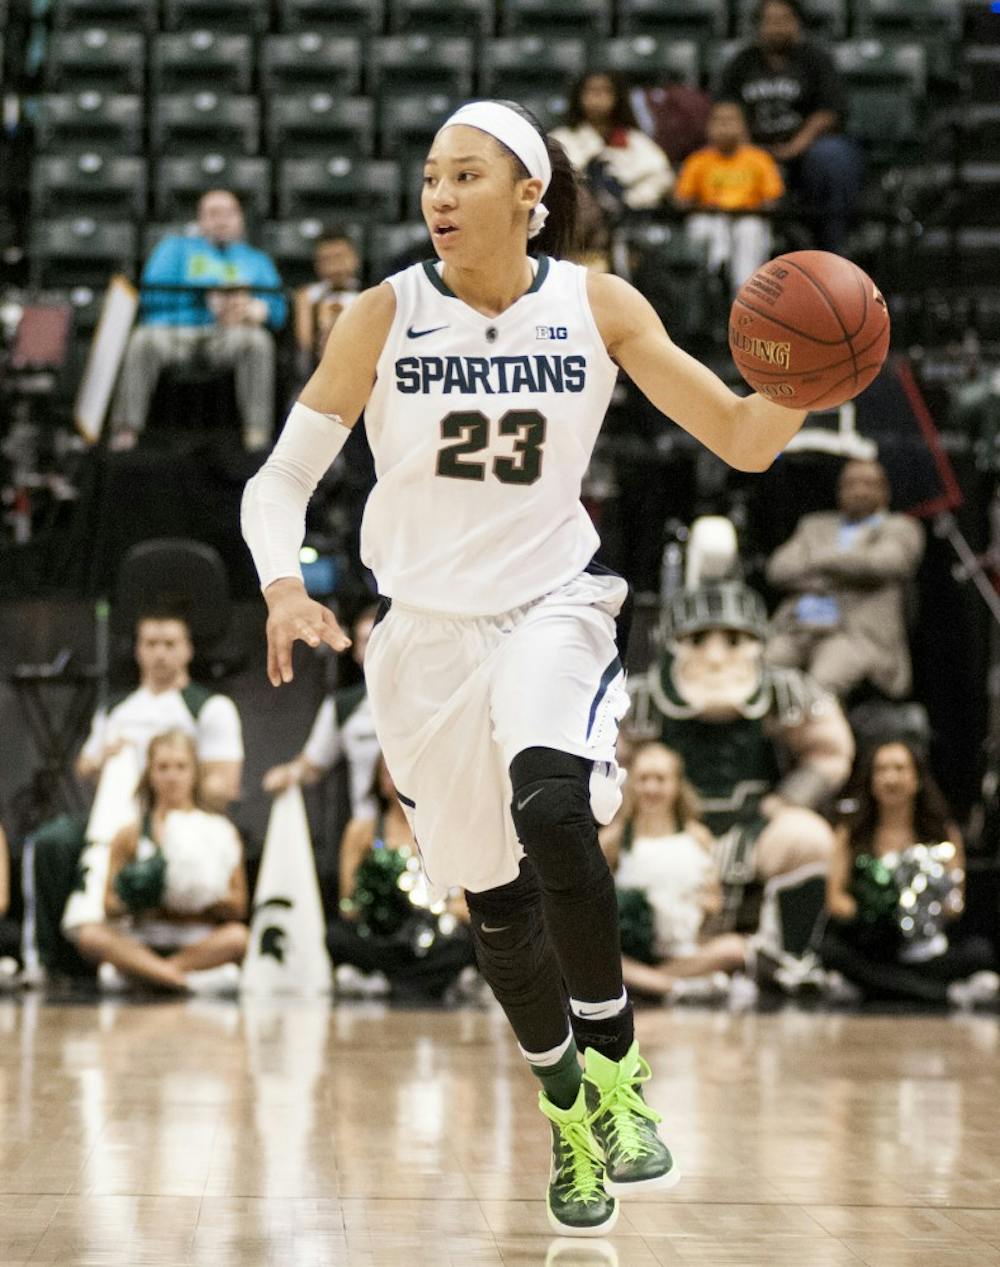 Junior forward Aerial Powers dribbles down the court during the women's basketball Big Ten championship game against Purdue on March 4, 2016 at Bankers Life Fieldhouse in Indianapolis. The Spartans defeated the Boilermakers, 65-64.